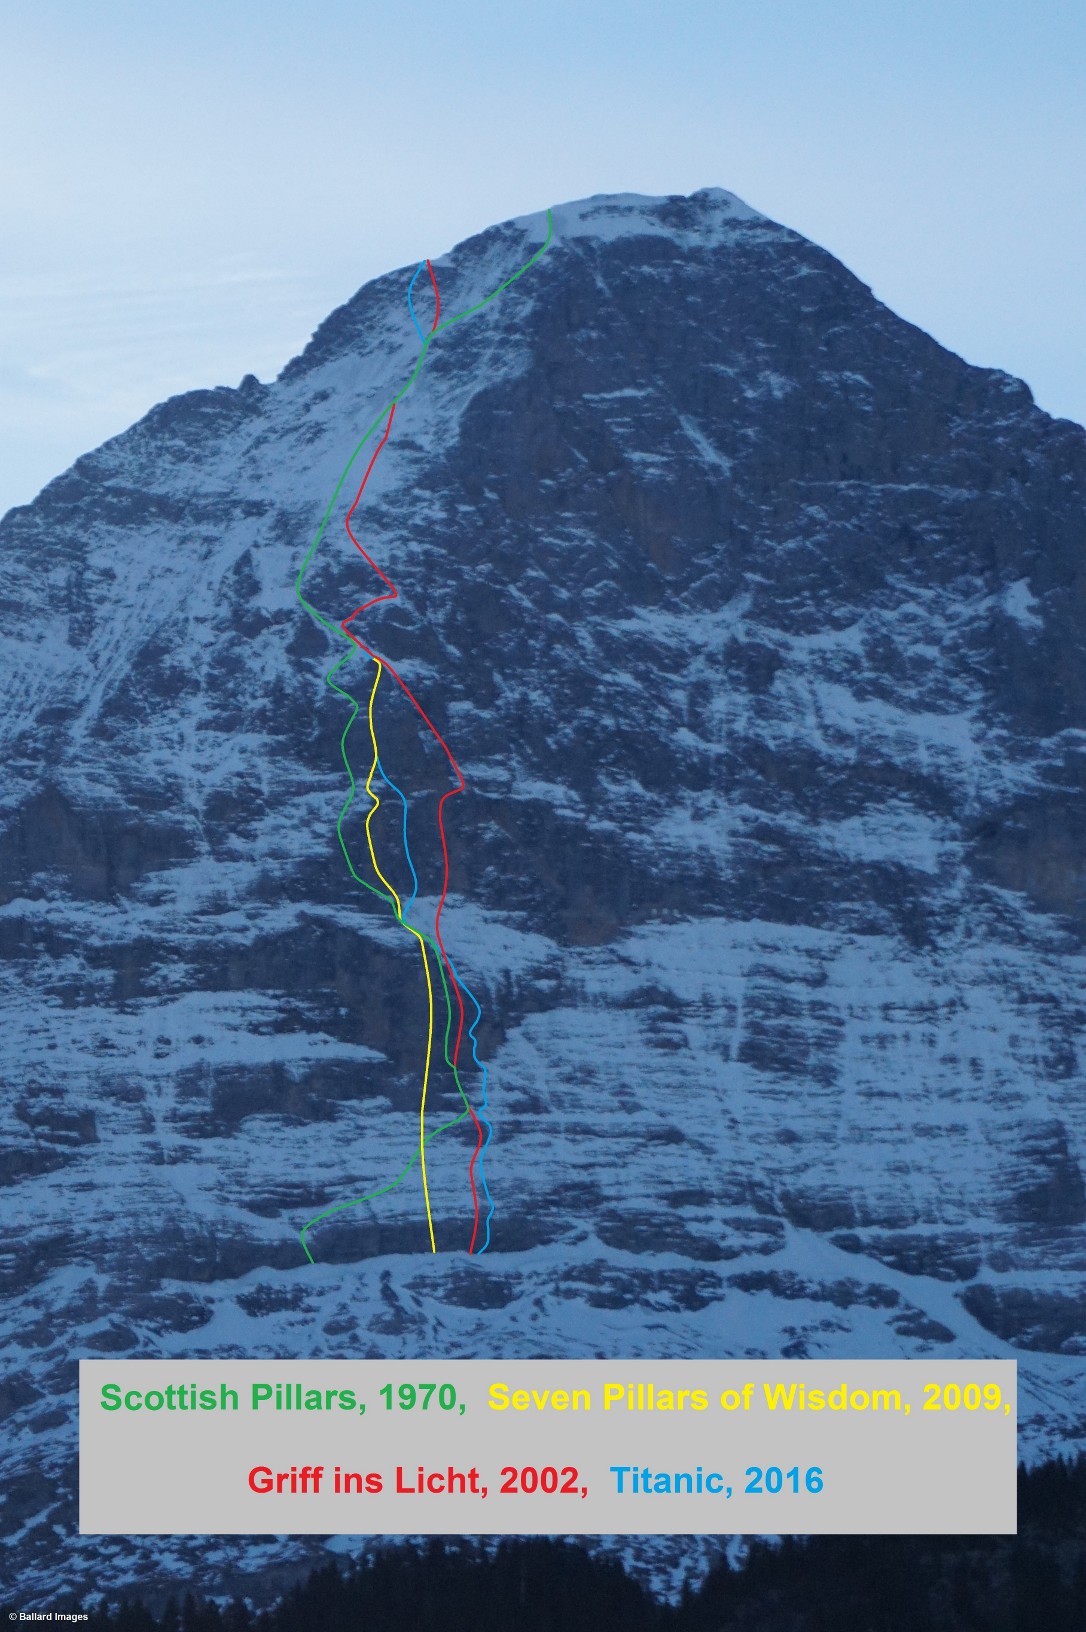 Tom Ballard's updated map of the Eiger's North Pillar routes. Titanic is shown in blue. Ballard said he discovered inaccuracies about the exact lines of these routes as they appear in other sources.* [Photo] Tom Ballard